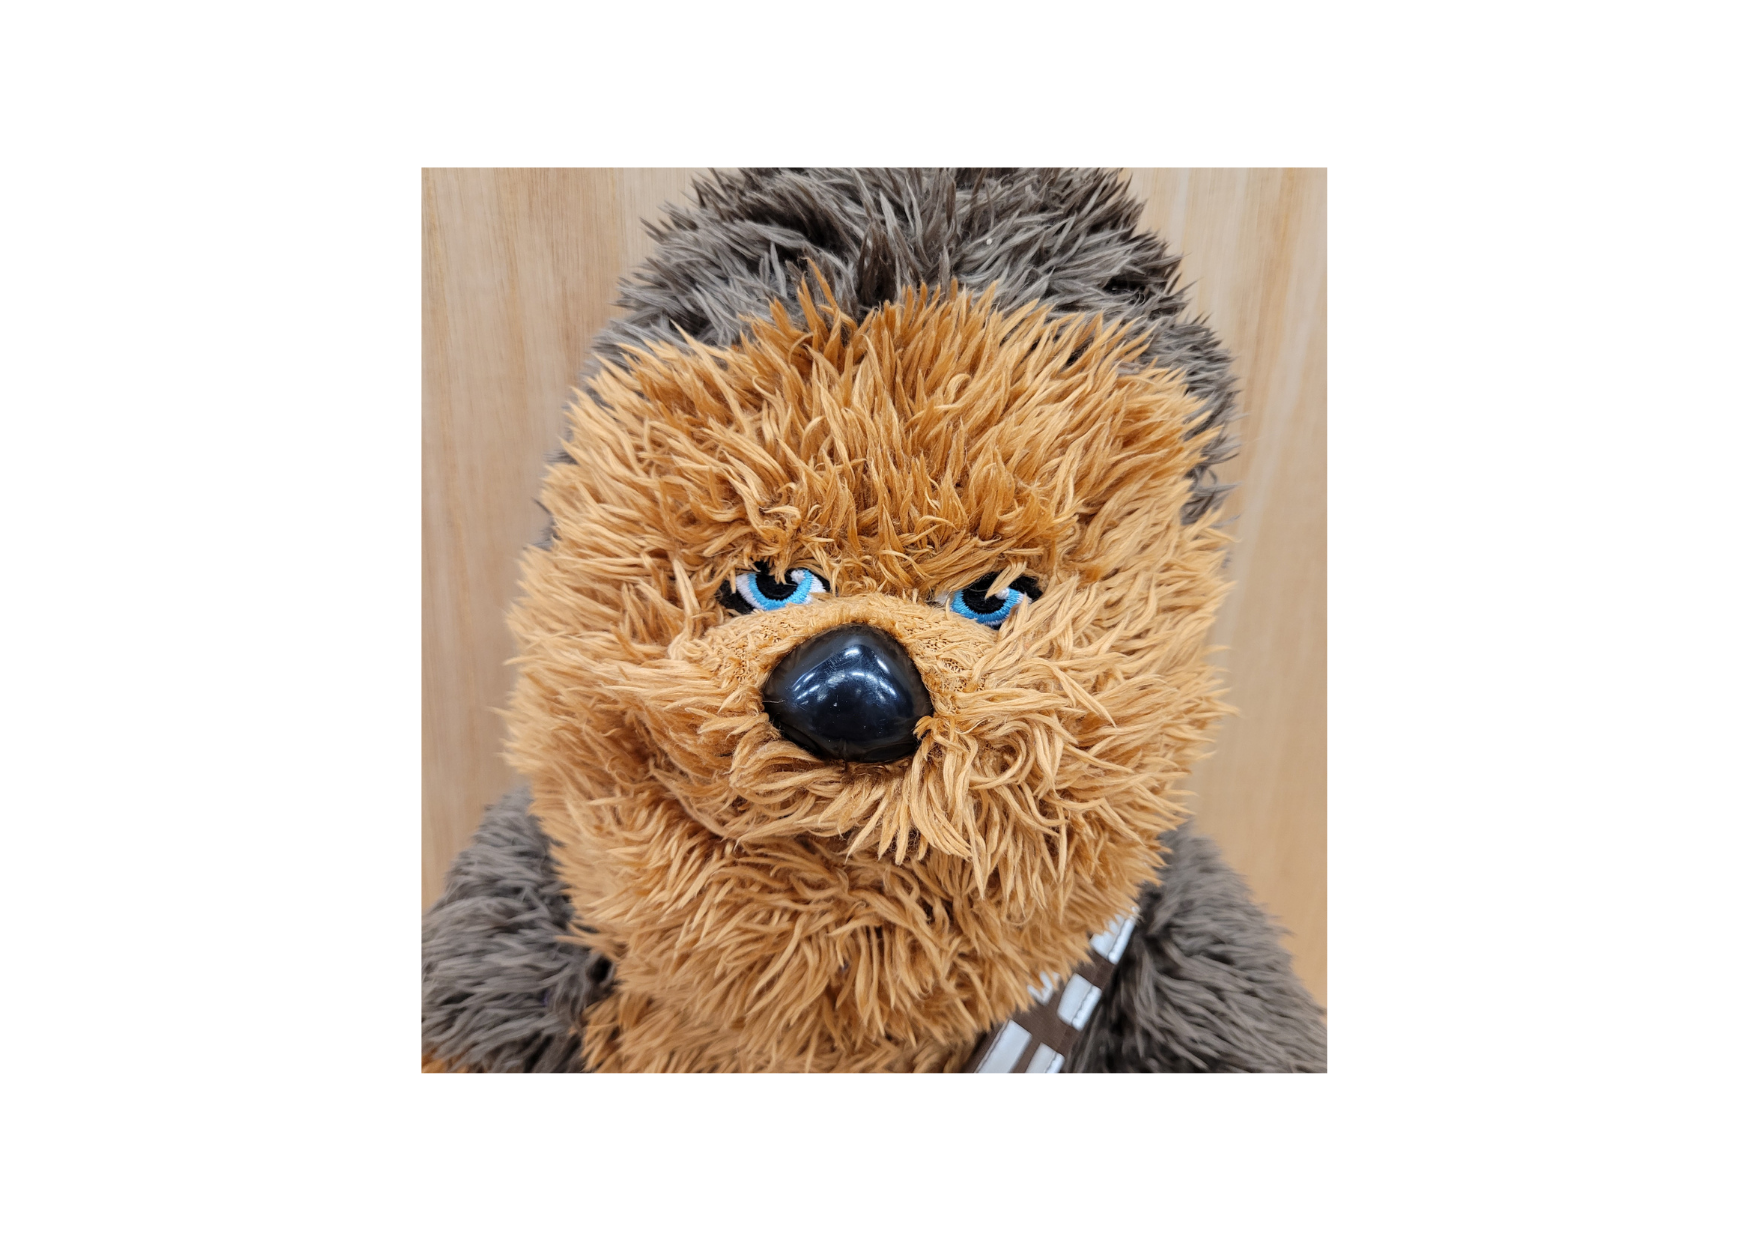 Star Wars Chewbacca Plush Close Up Face View